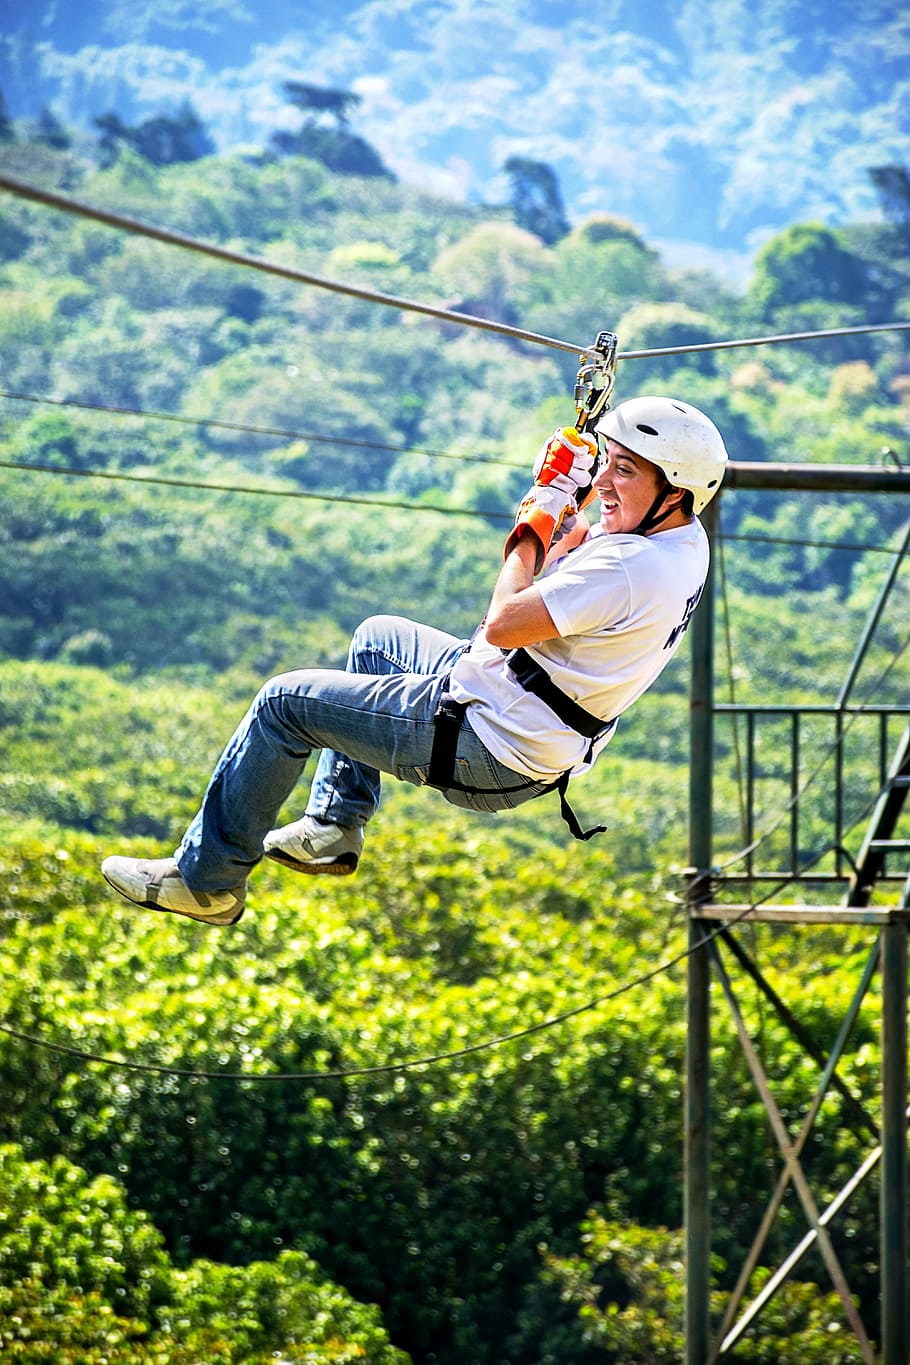 smiling, man ziplining, green, tree canopy, daytime, end, sport, nature, fun, canopy